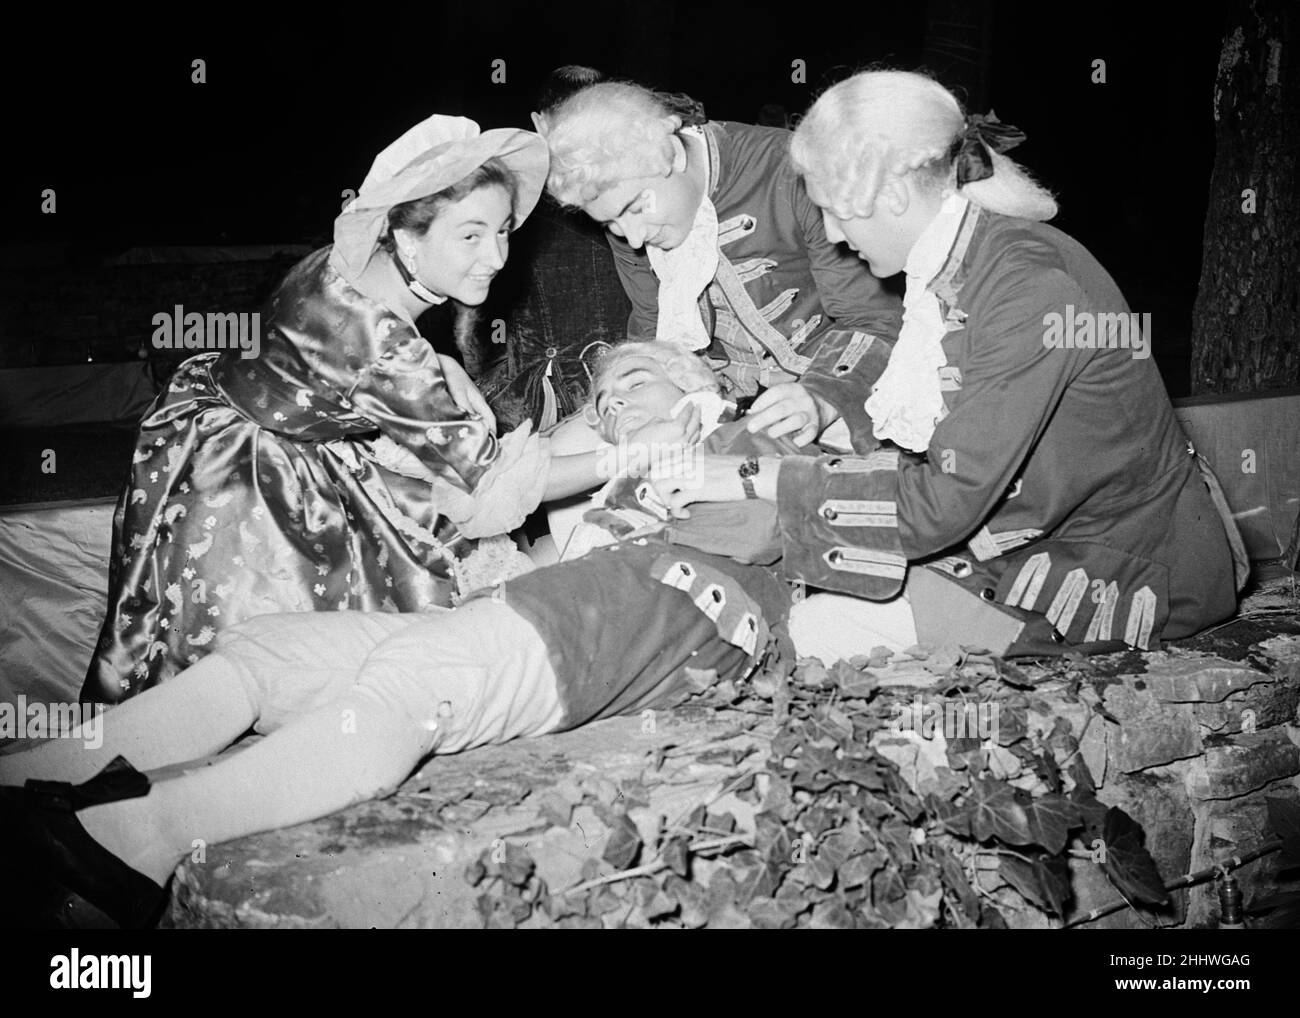 Costume ball hosted by George de Cuevas in Biarritz, France, Tuesday 1st September 1953. Our Picture Shows ... a lackey who collapsed during the ball, receives medical attention. Stock Photo